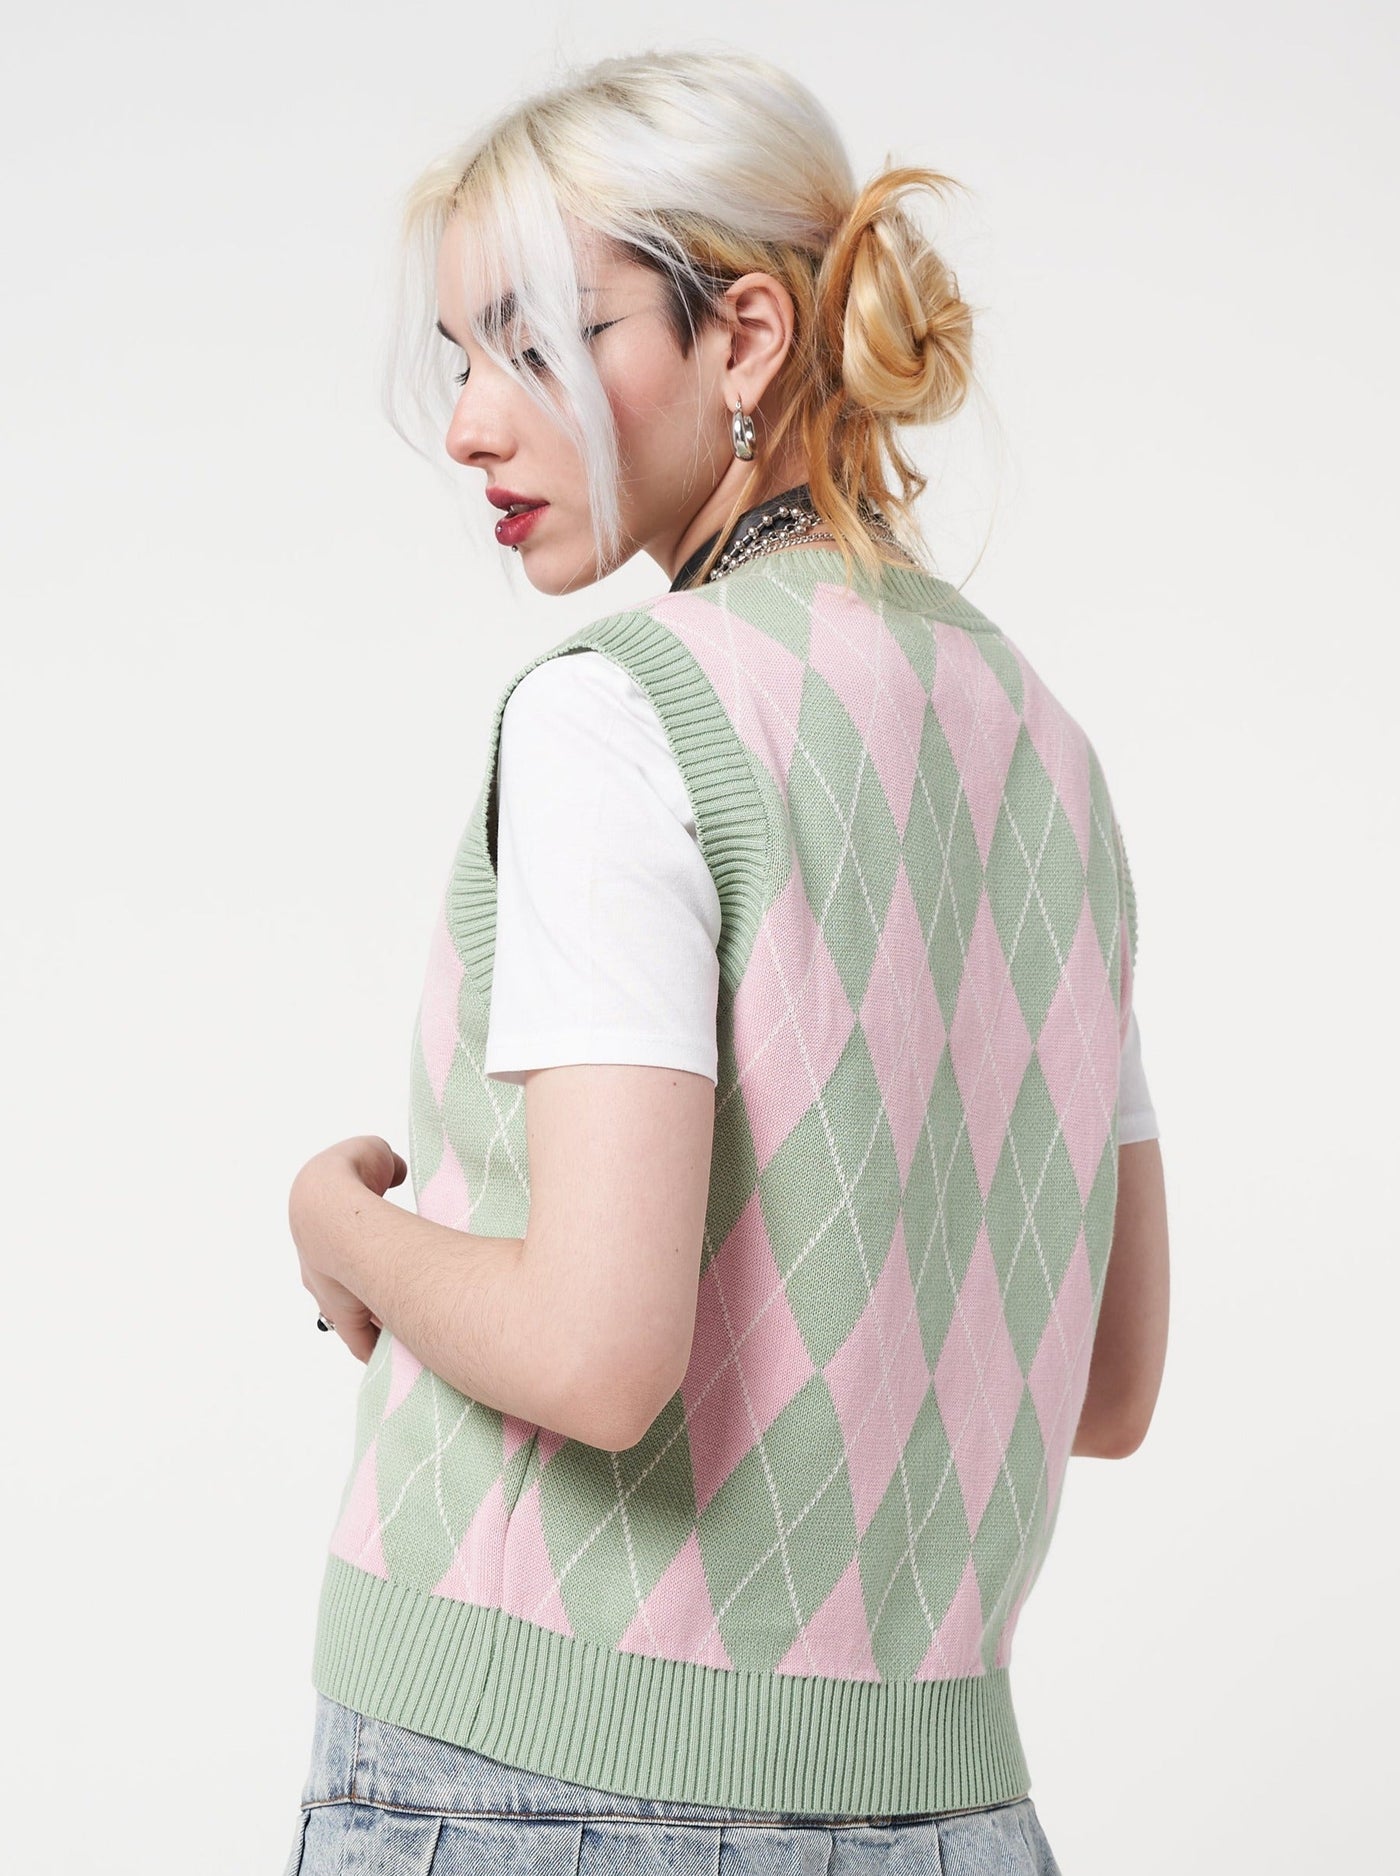 Argyle knitted sweater vest in pink and sage green 